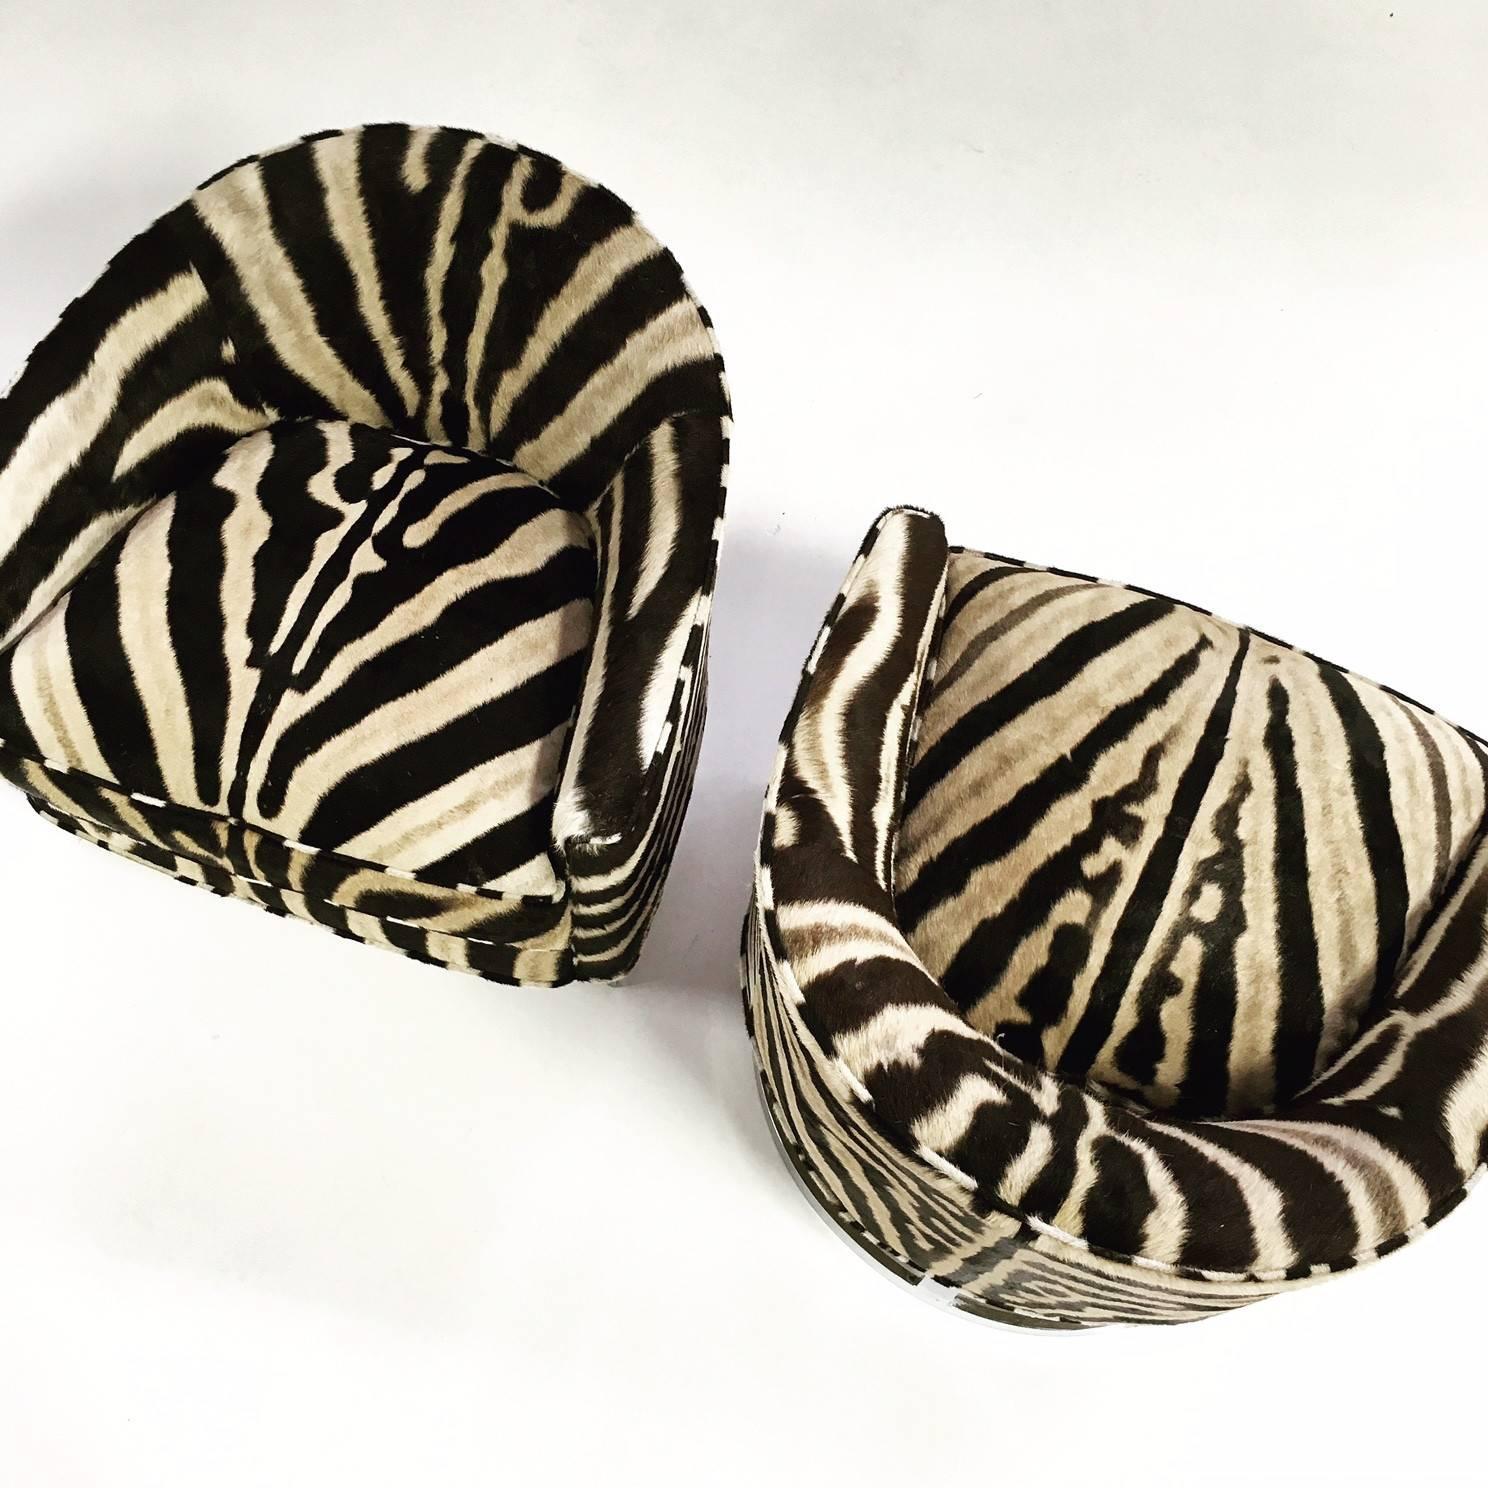 The Forsyth design team loves collecting pairs of Milo Baughman's beautifully cool mid-century designs. While Baughman may have thought upholstery in zebra hide on his chairs could be too showy, we tend to disagree. The look is still elegantly